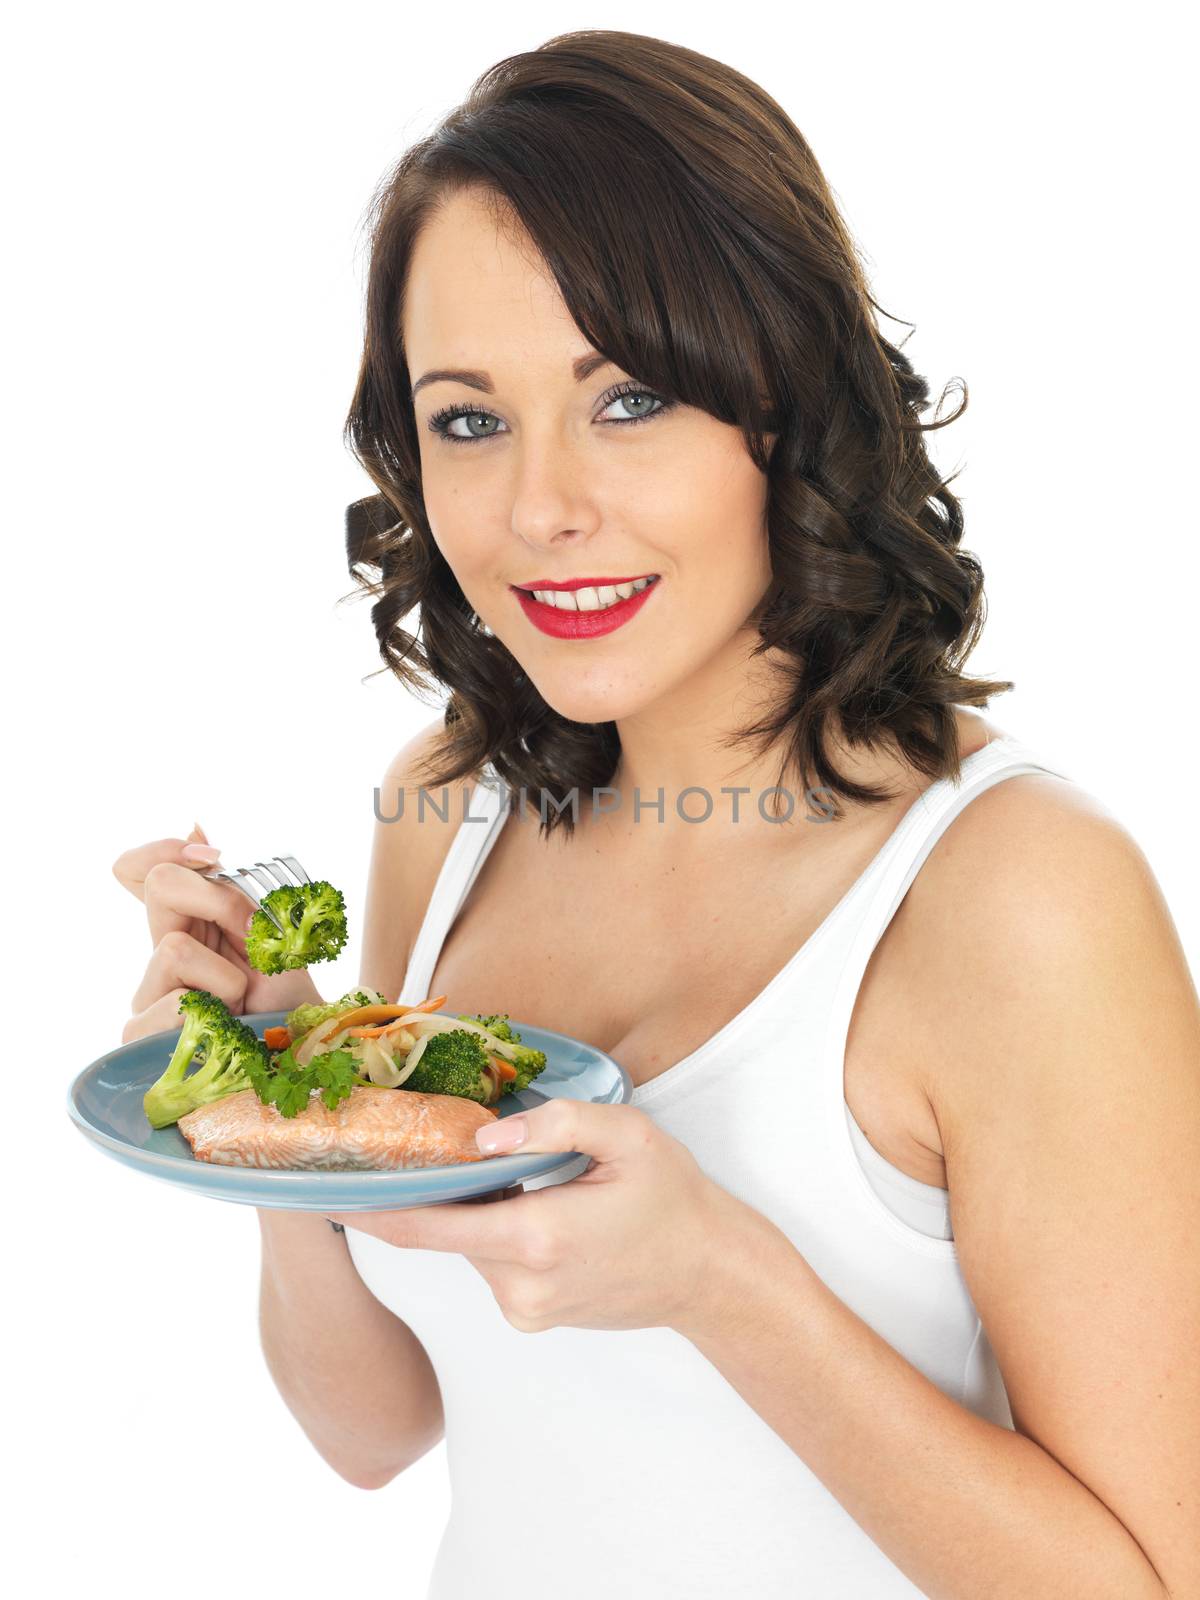 Young Woman Eating Poached Salmon and Vegetables by Whiteboxmedia